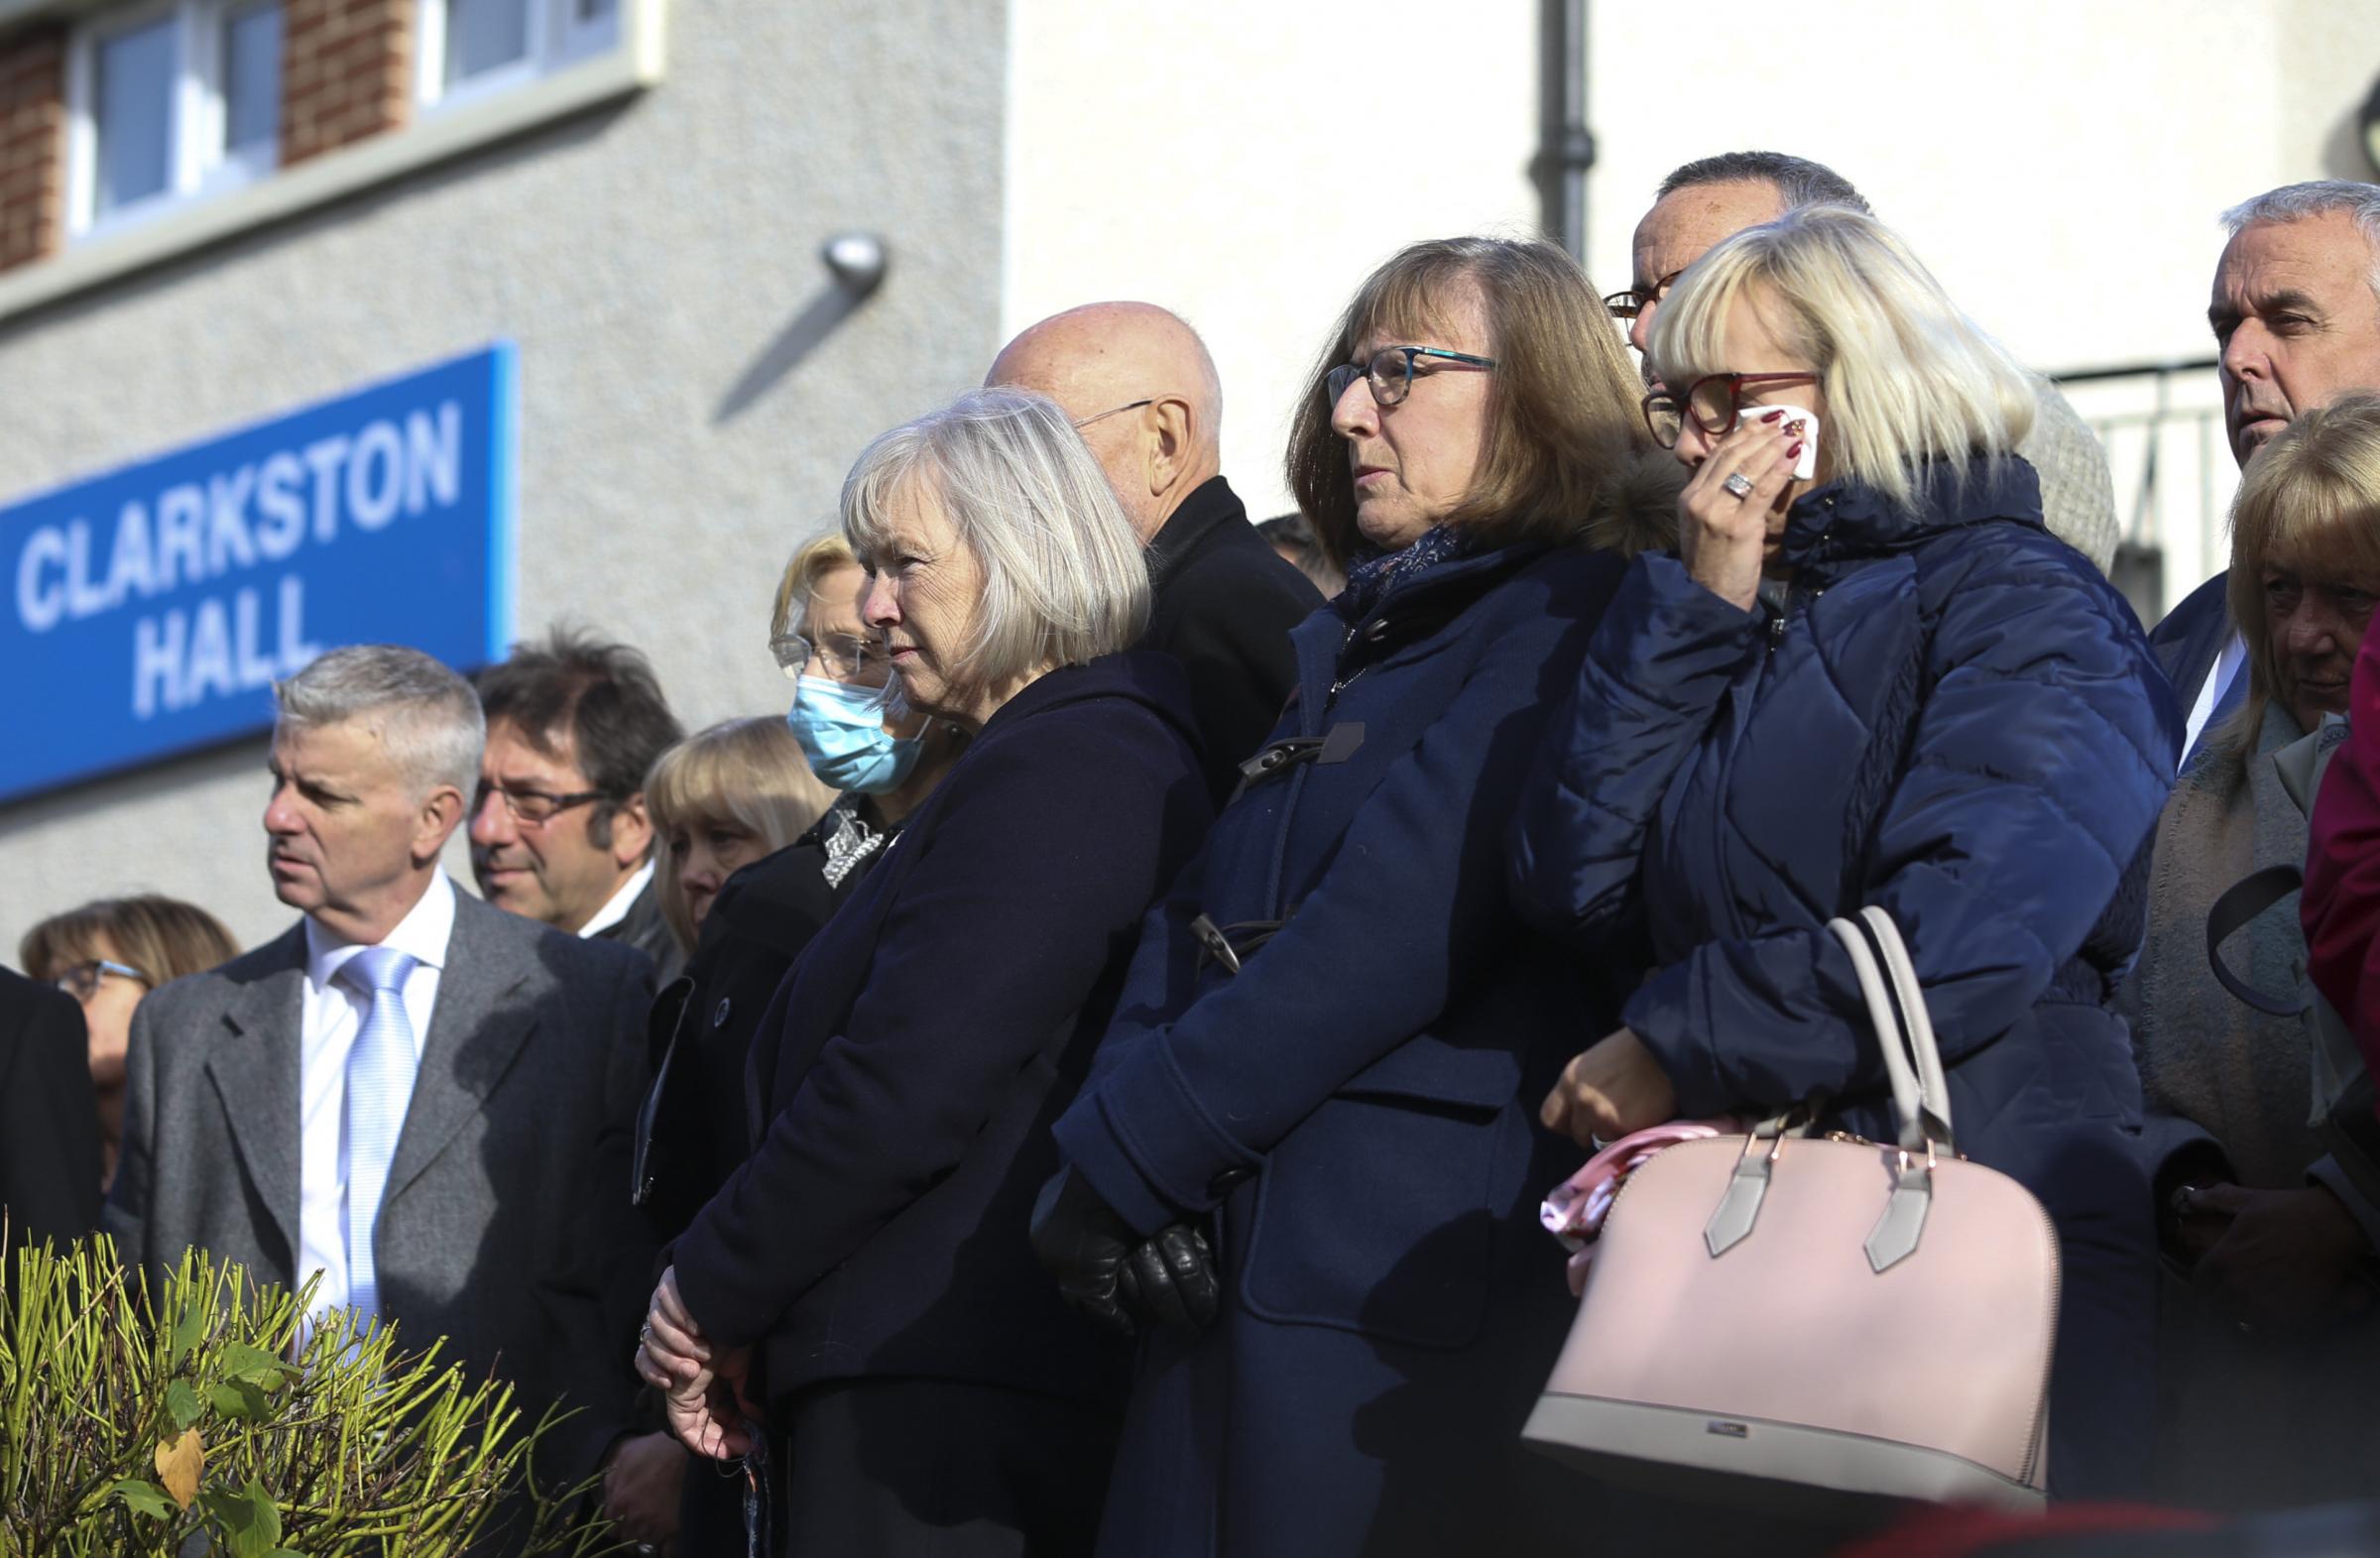 Members of the Clarkston community marked the 50th anniversary of the towns gas explosion which took 22 lives with a ceremony. Photo by Gordon Terris.